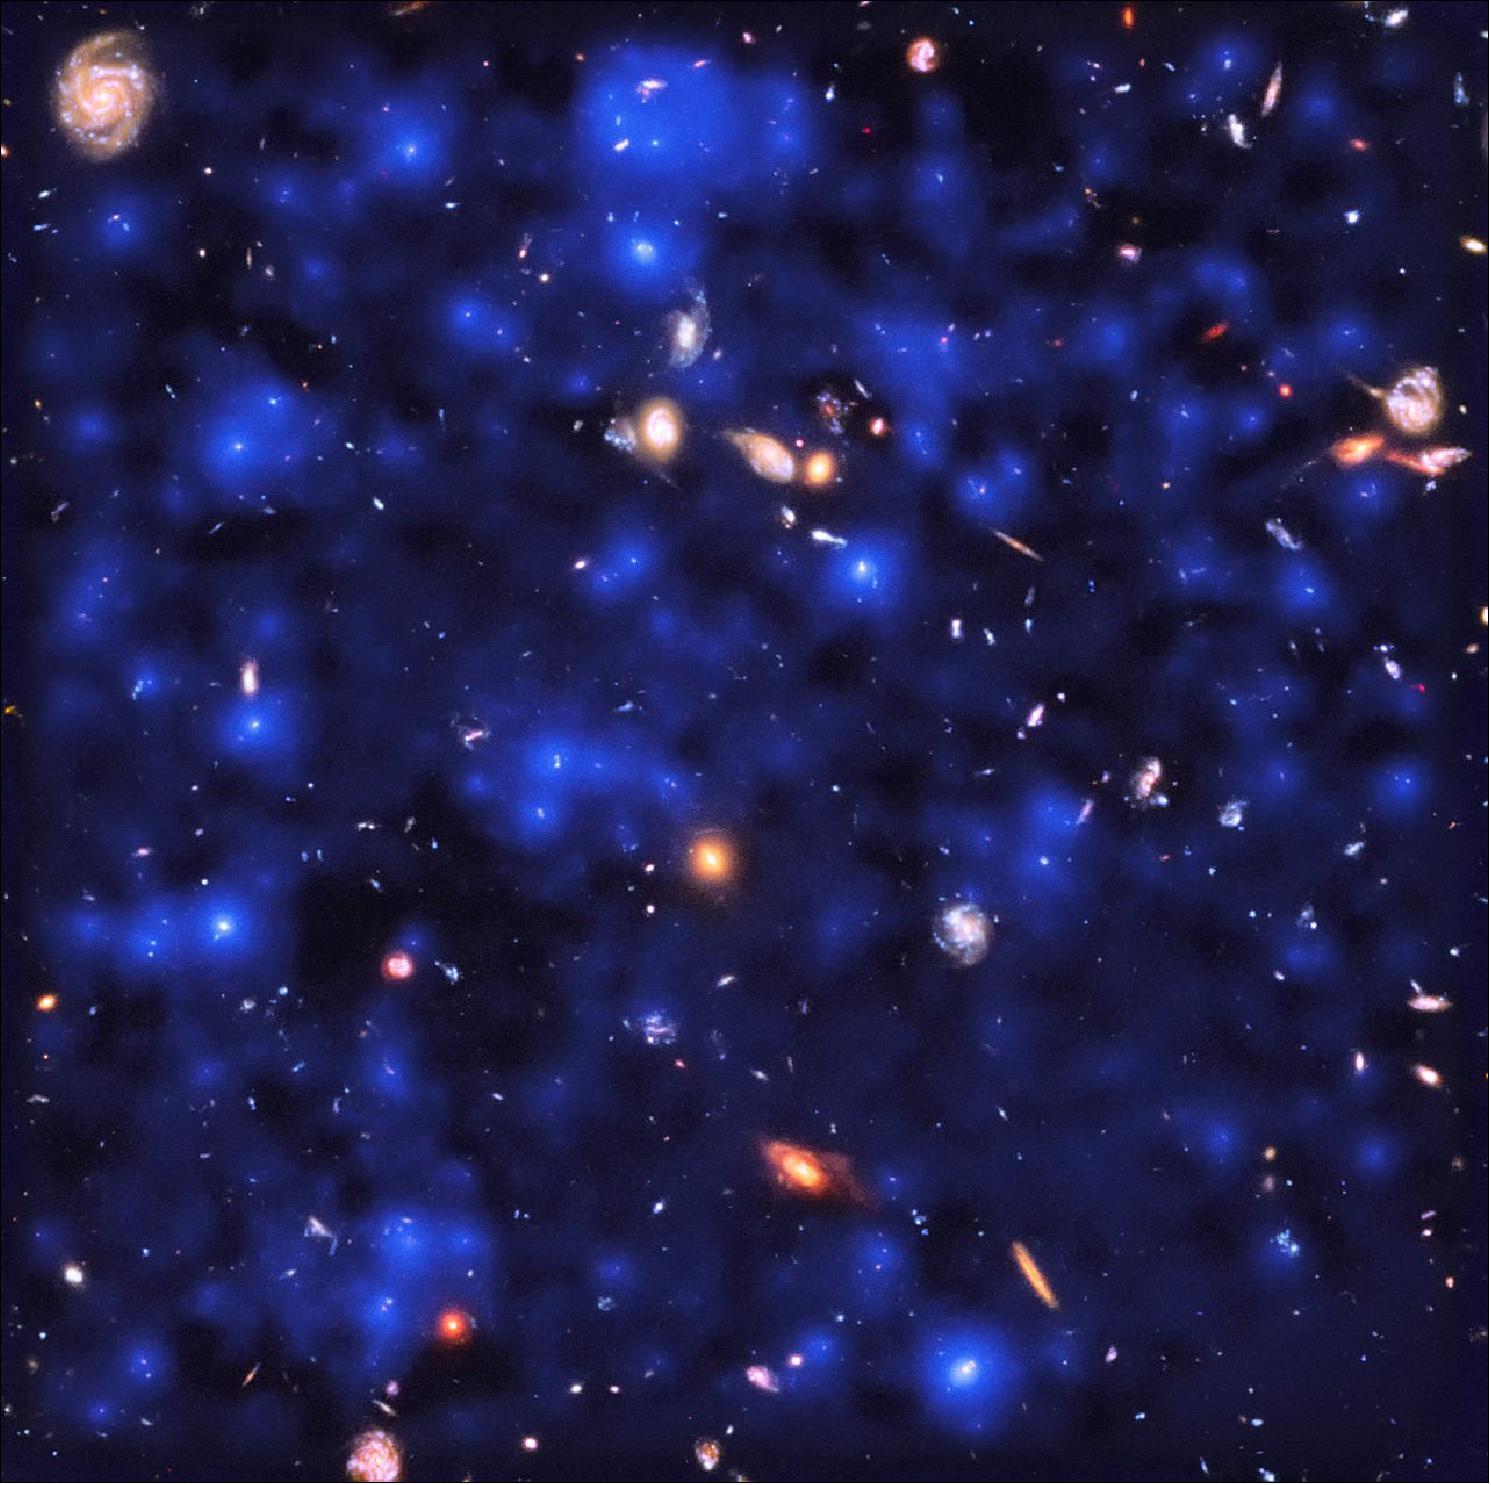 Figure 61: Deep observations made with the MUSE spectrograph on ESO’s VLT have uncovered vast cosmic reservoirs of atomic hydrogen surrounding distant galaxies. The exquisite sensitivity of MUSE allowed for direct observations of dim clouds of hydrogen glowing with Lyman-alpha emission in the early Universe — revealing that almost the whole night sky is invisibly aglow (image credit: eso 1832)